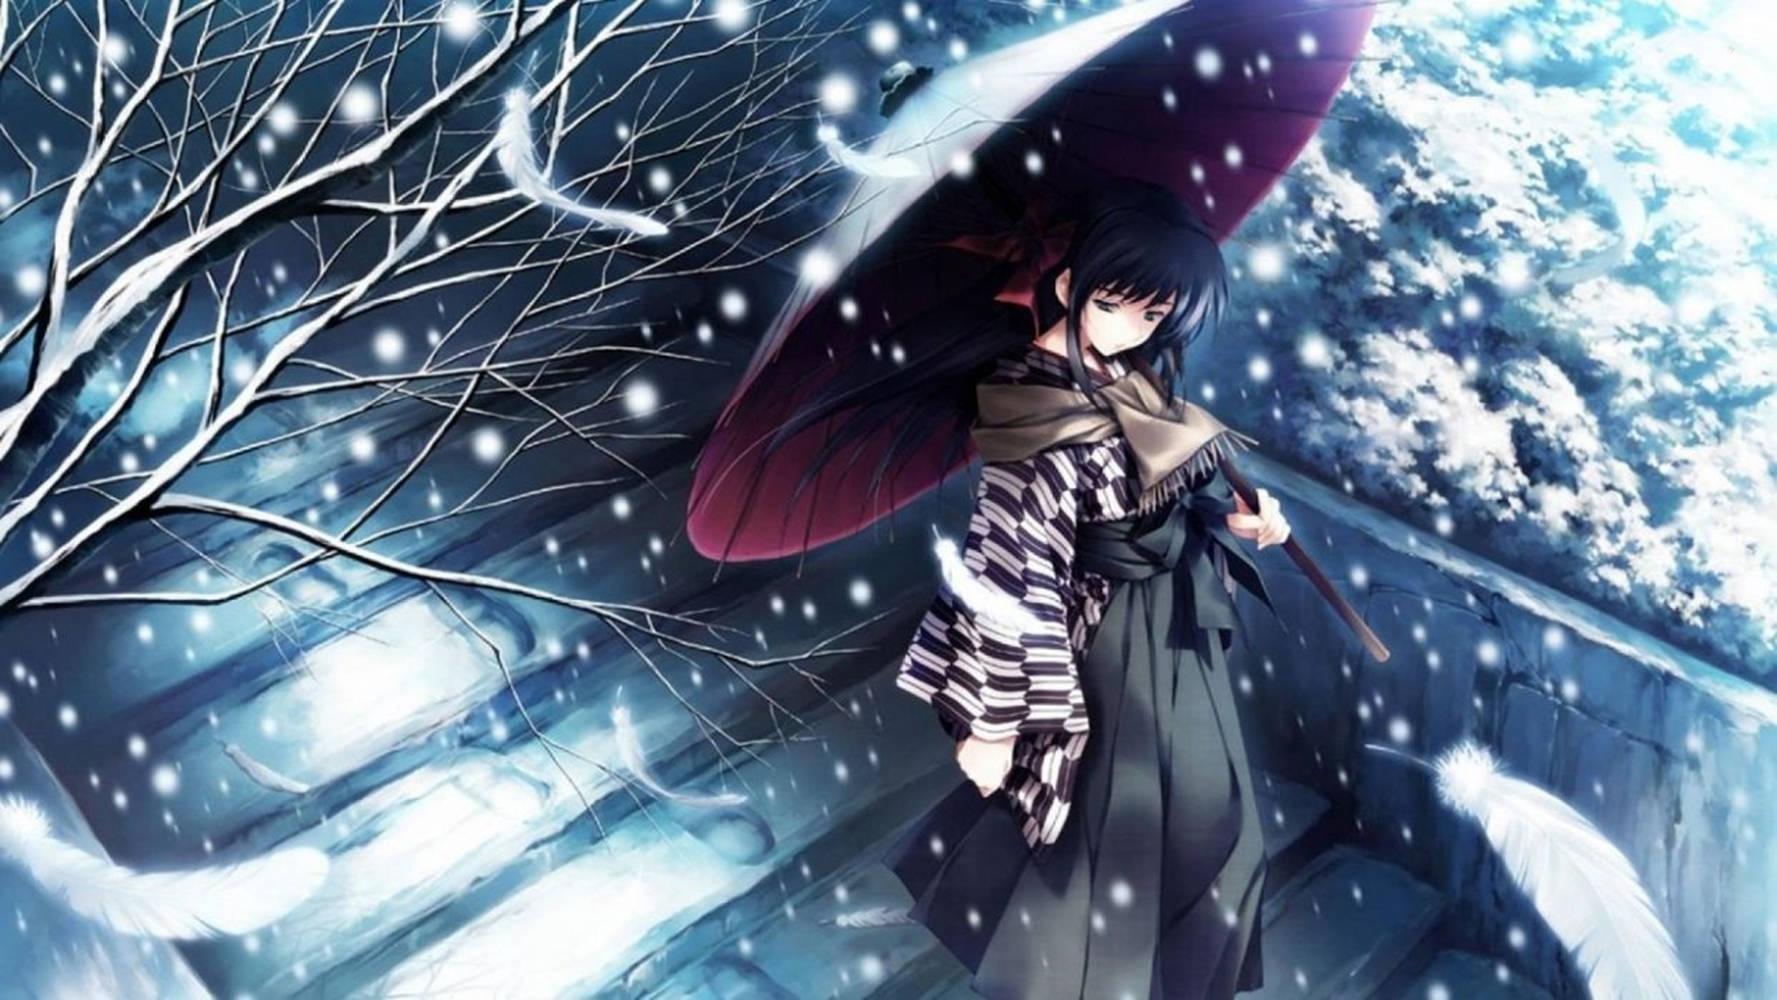 Anime Girl Sad Alone With Parasol Winter Aesthetic Background